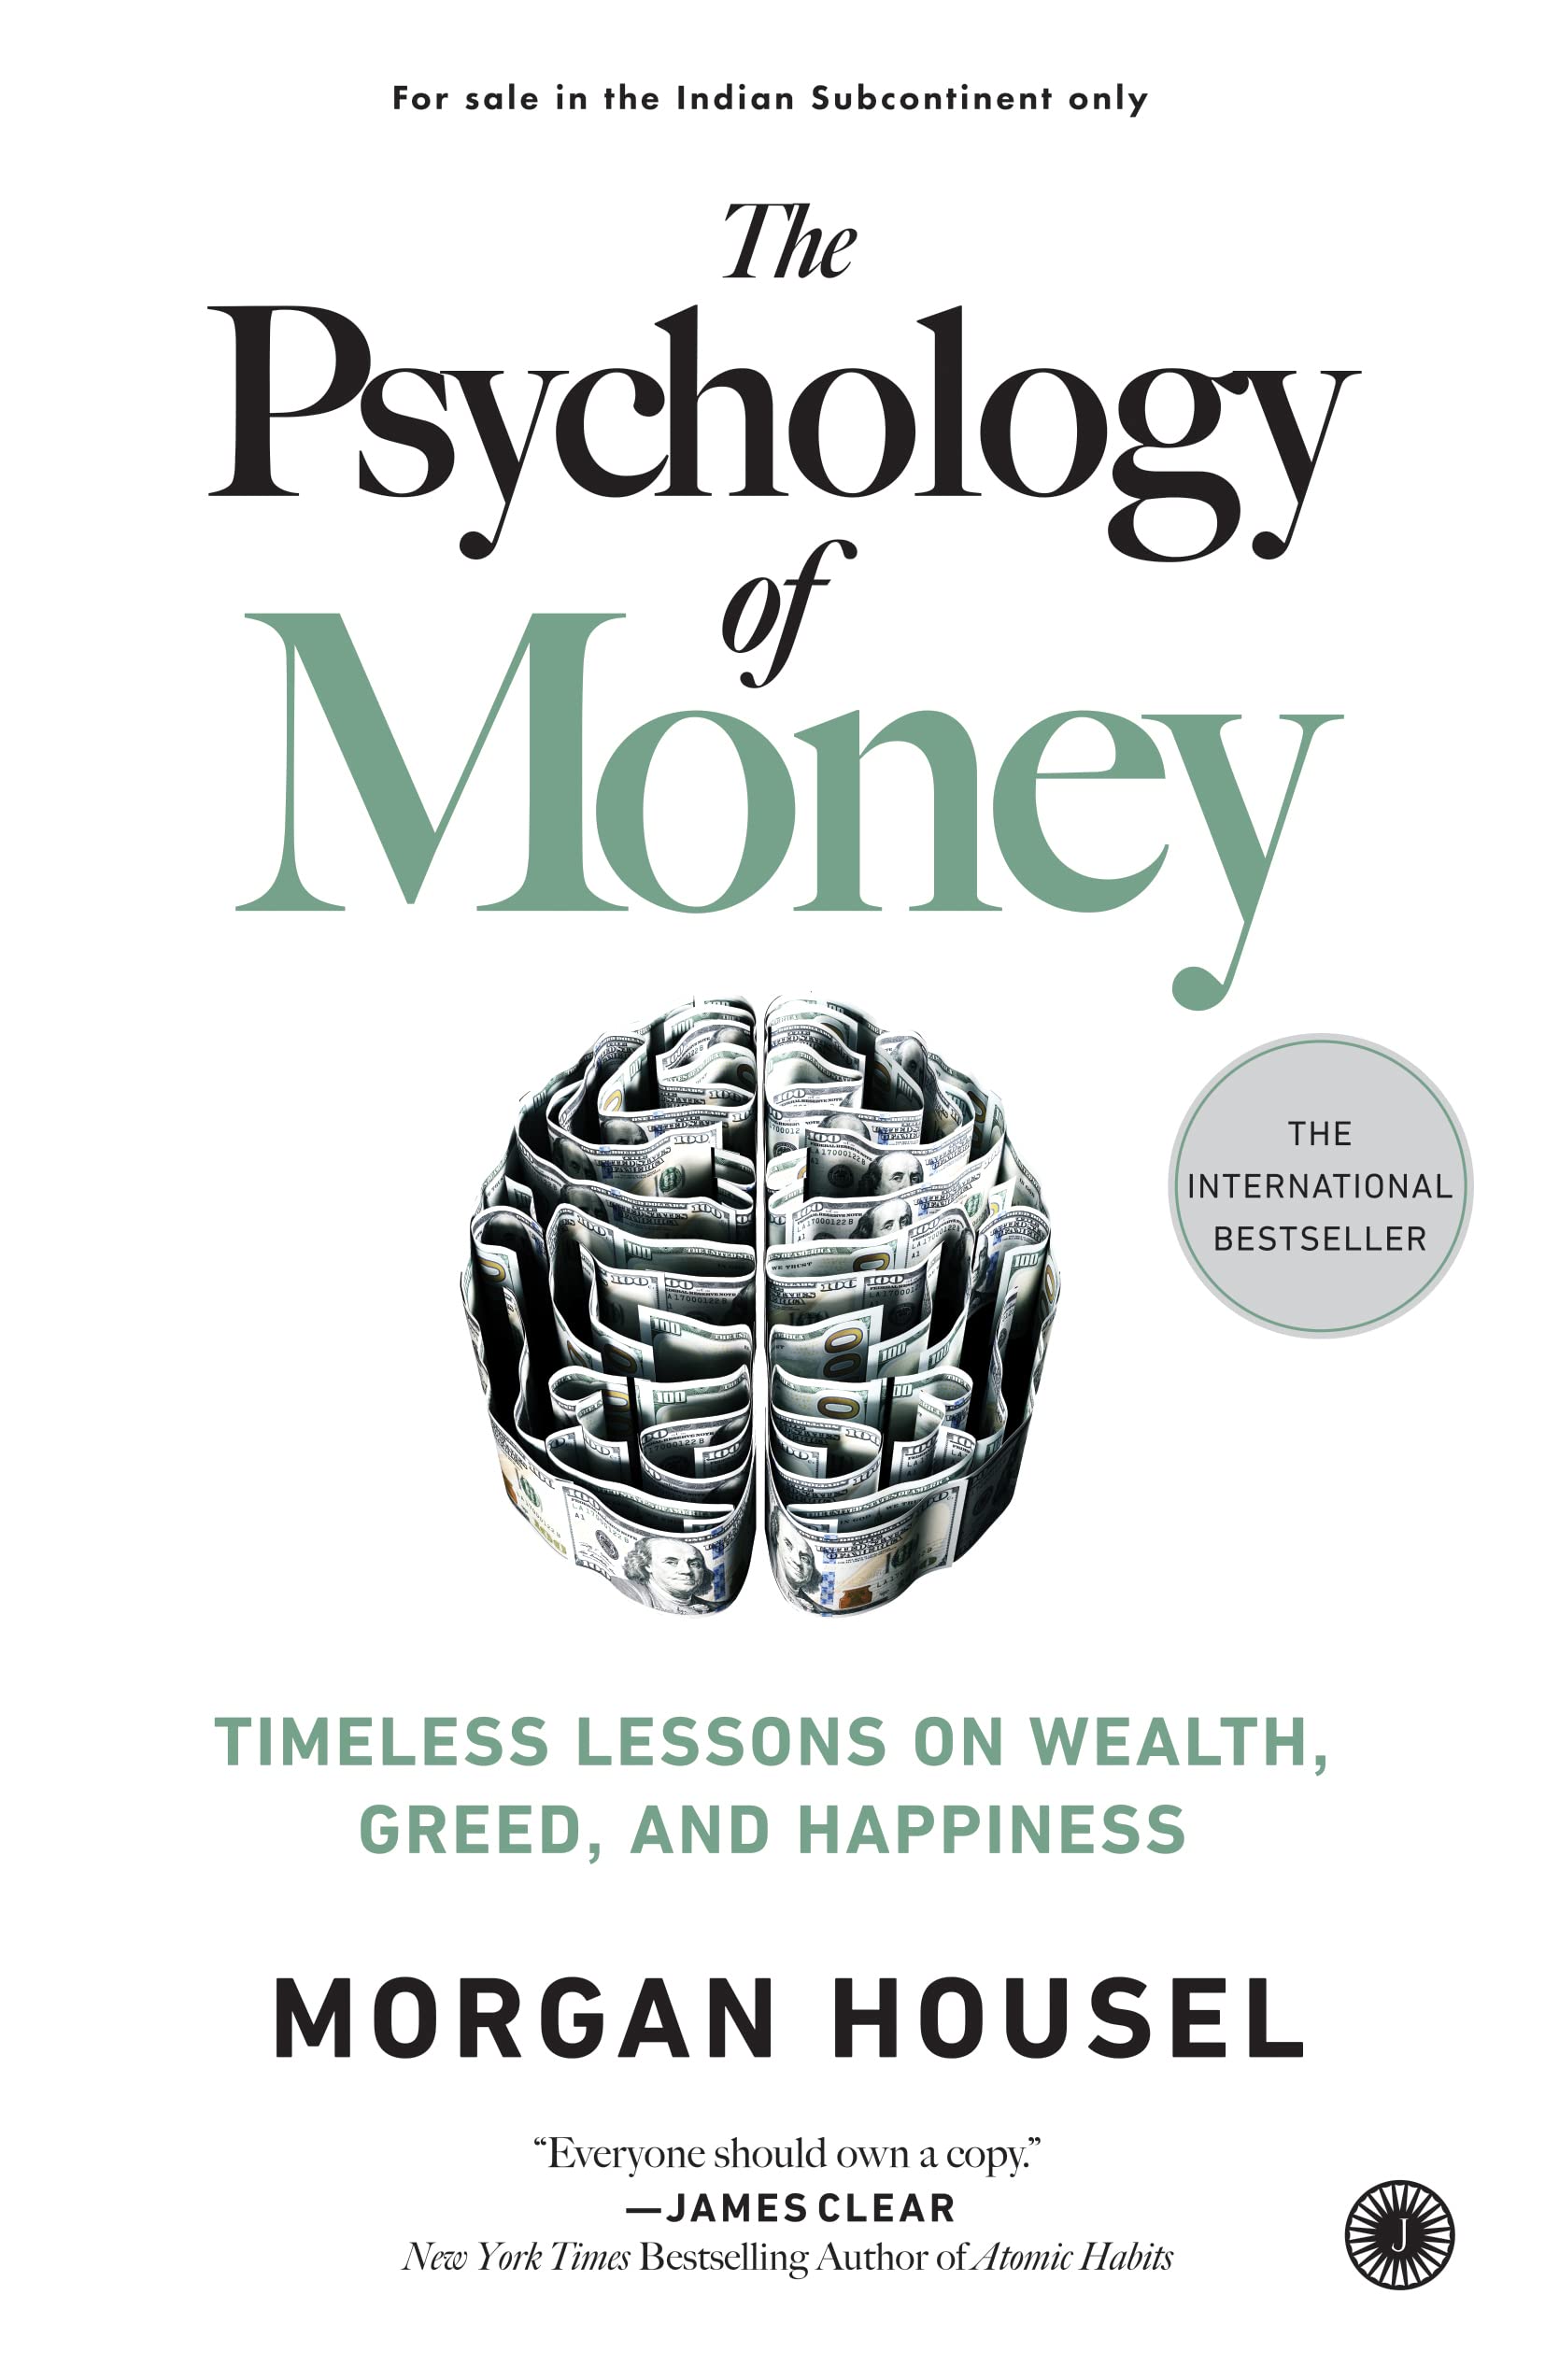 [PDF] Download The Psychology of Money by Morgan housel Book pdf